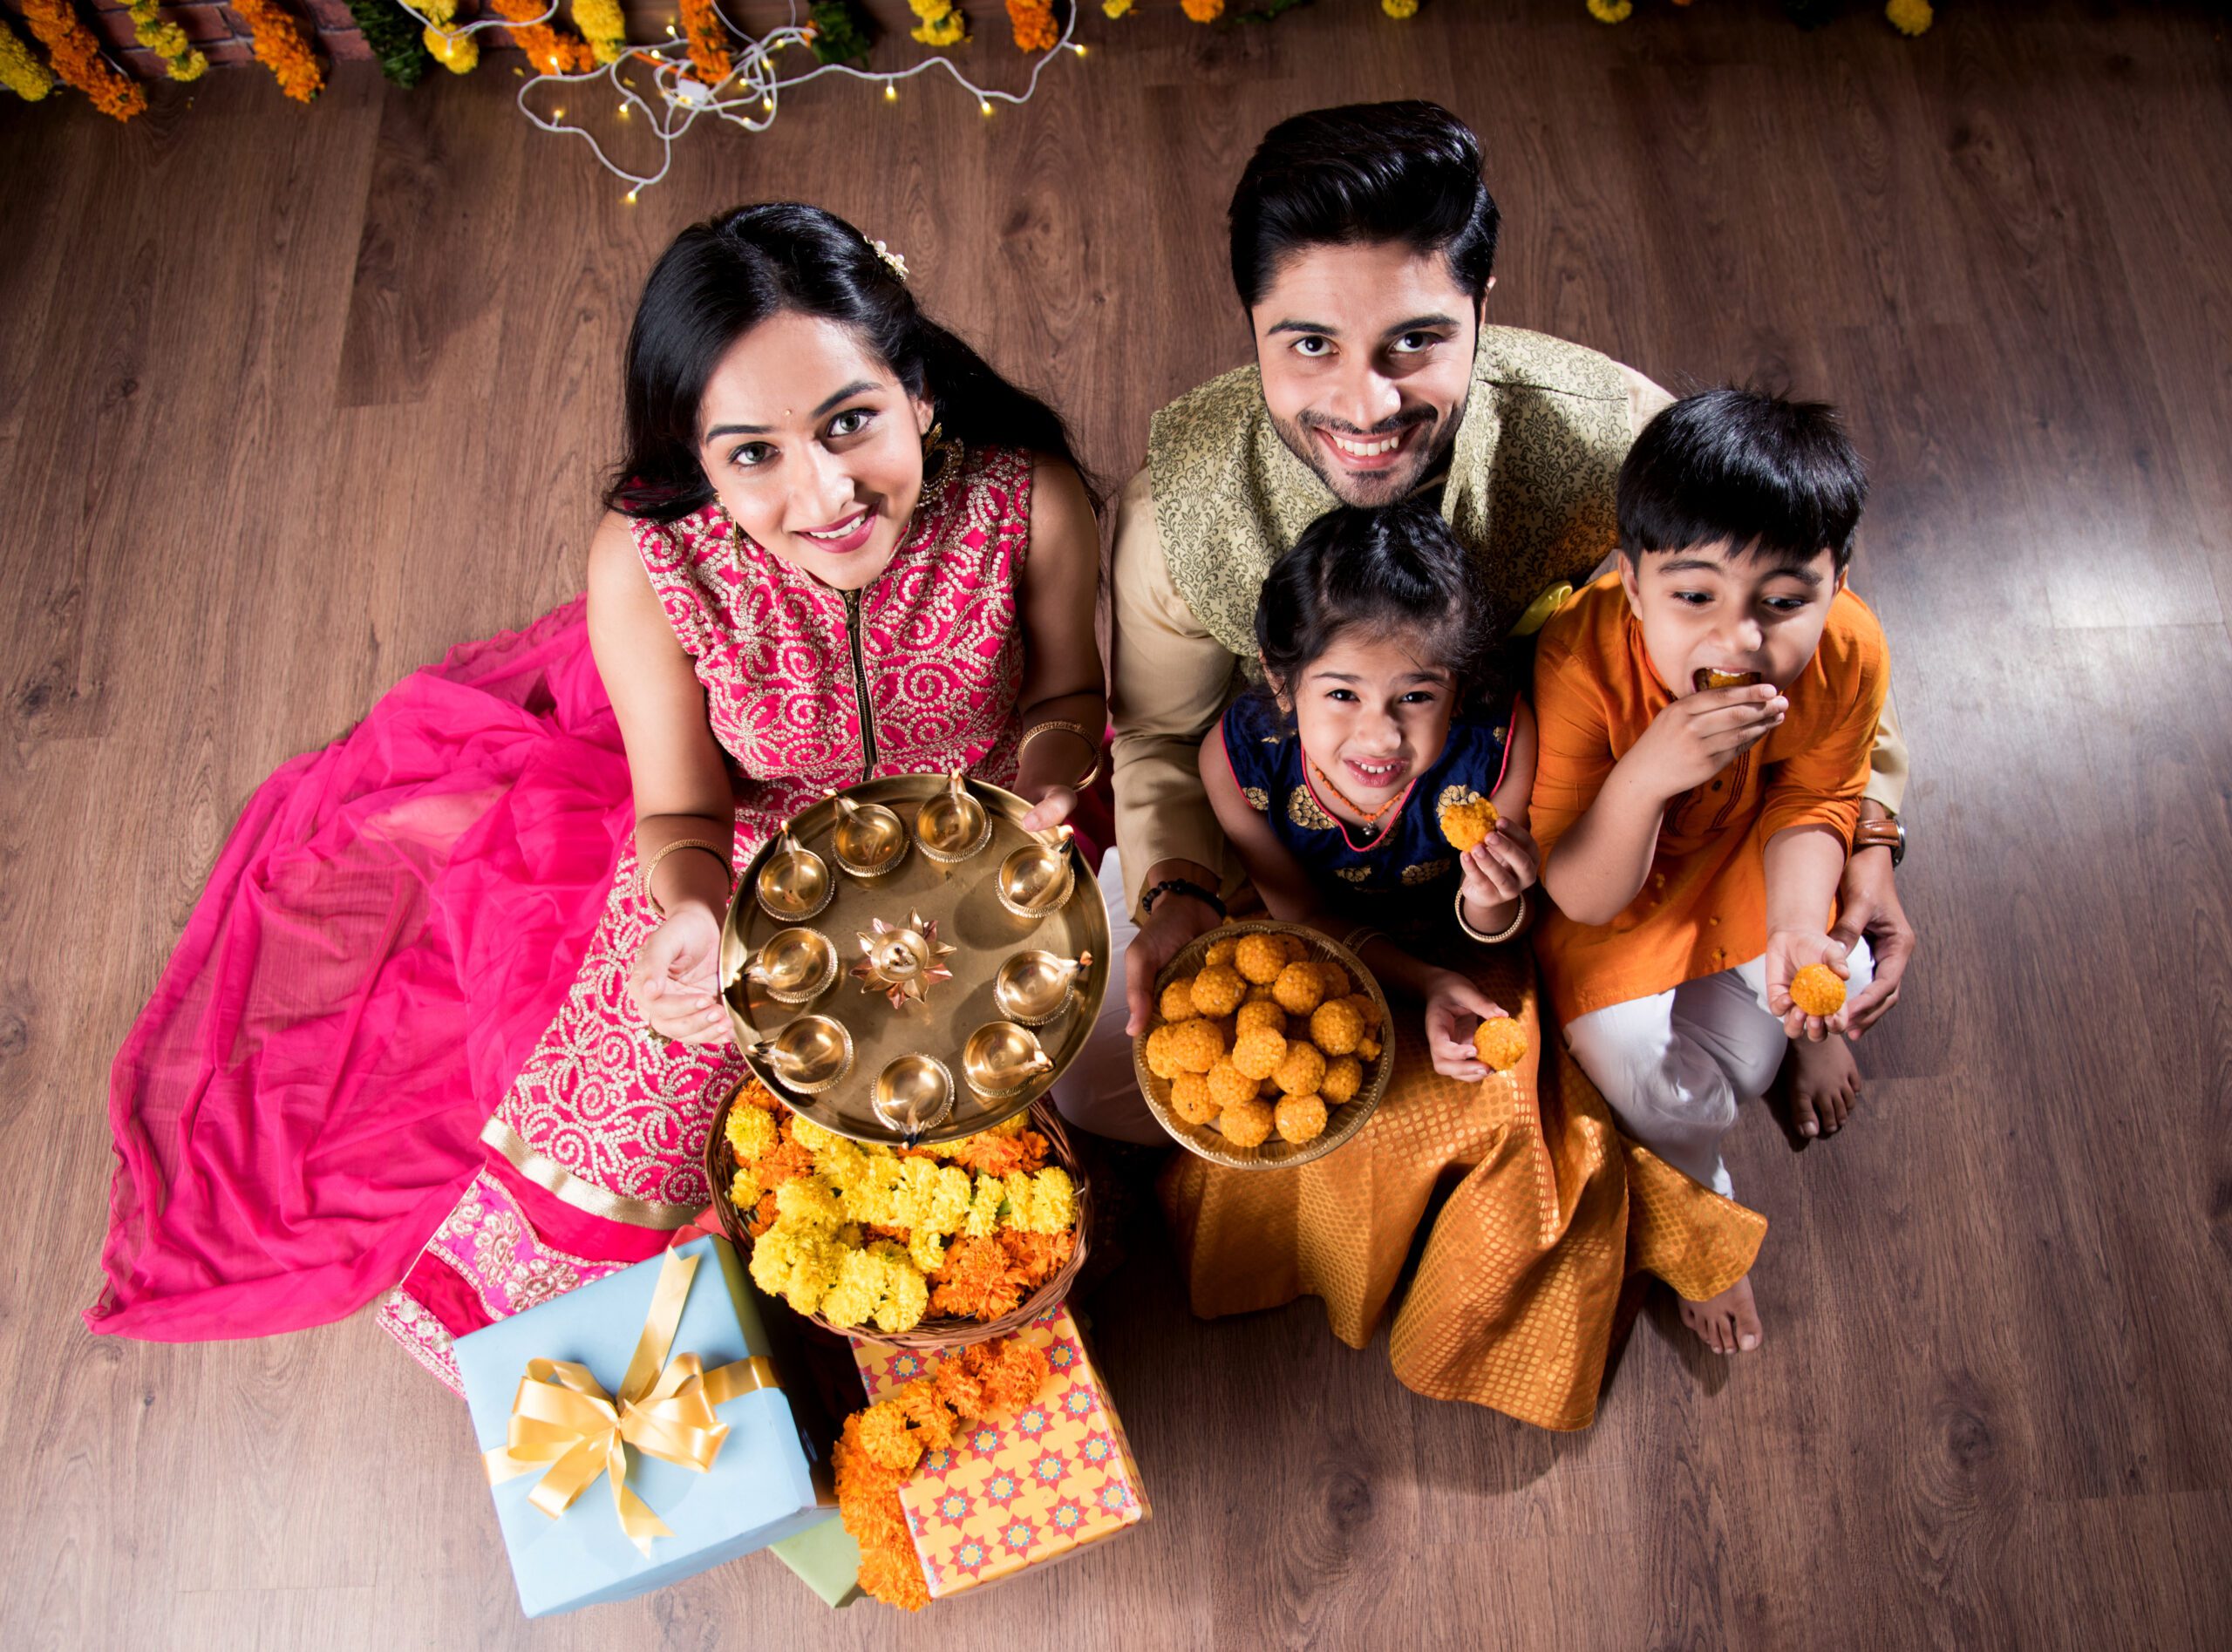 5 Things You Can Do To Take Care Of Your Mental Health & Emotional Well-being During Diwali